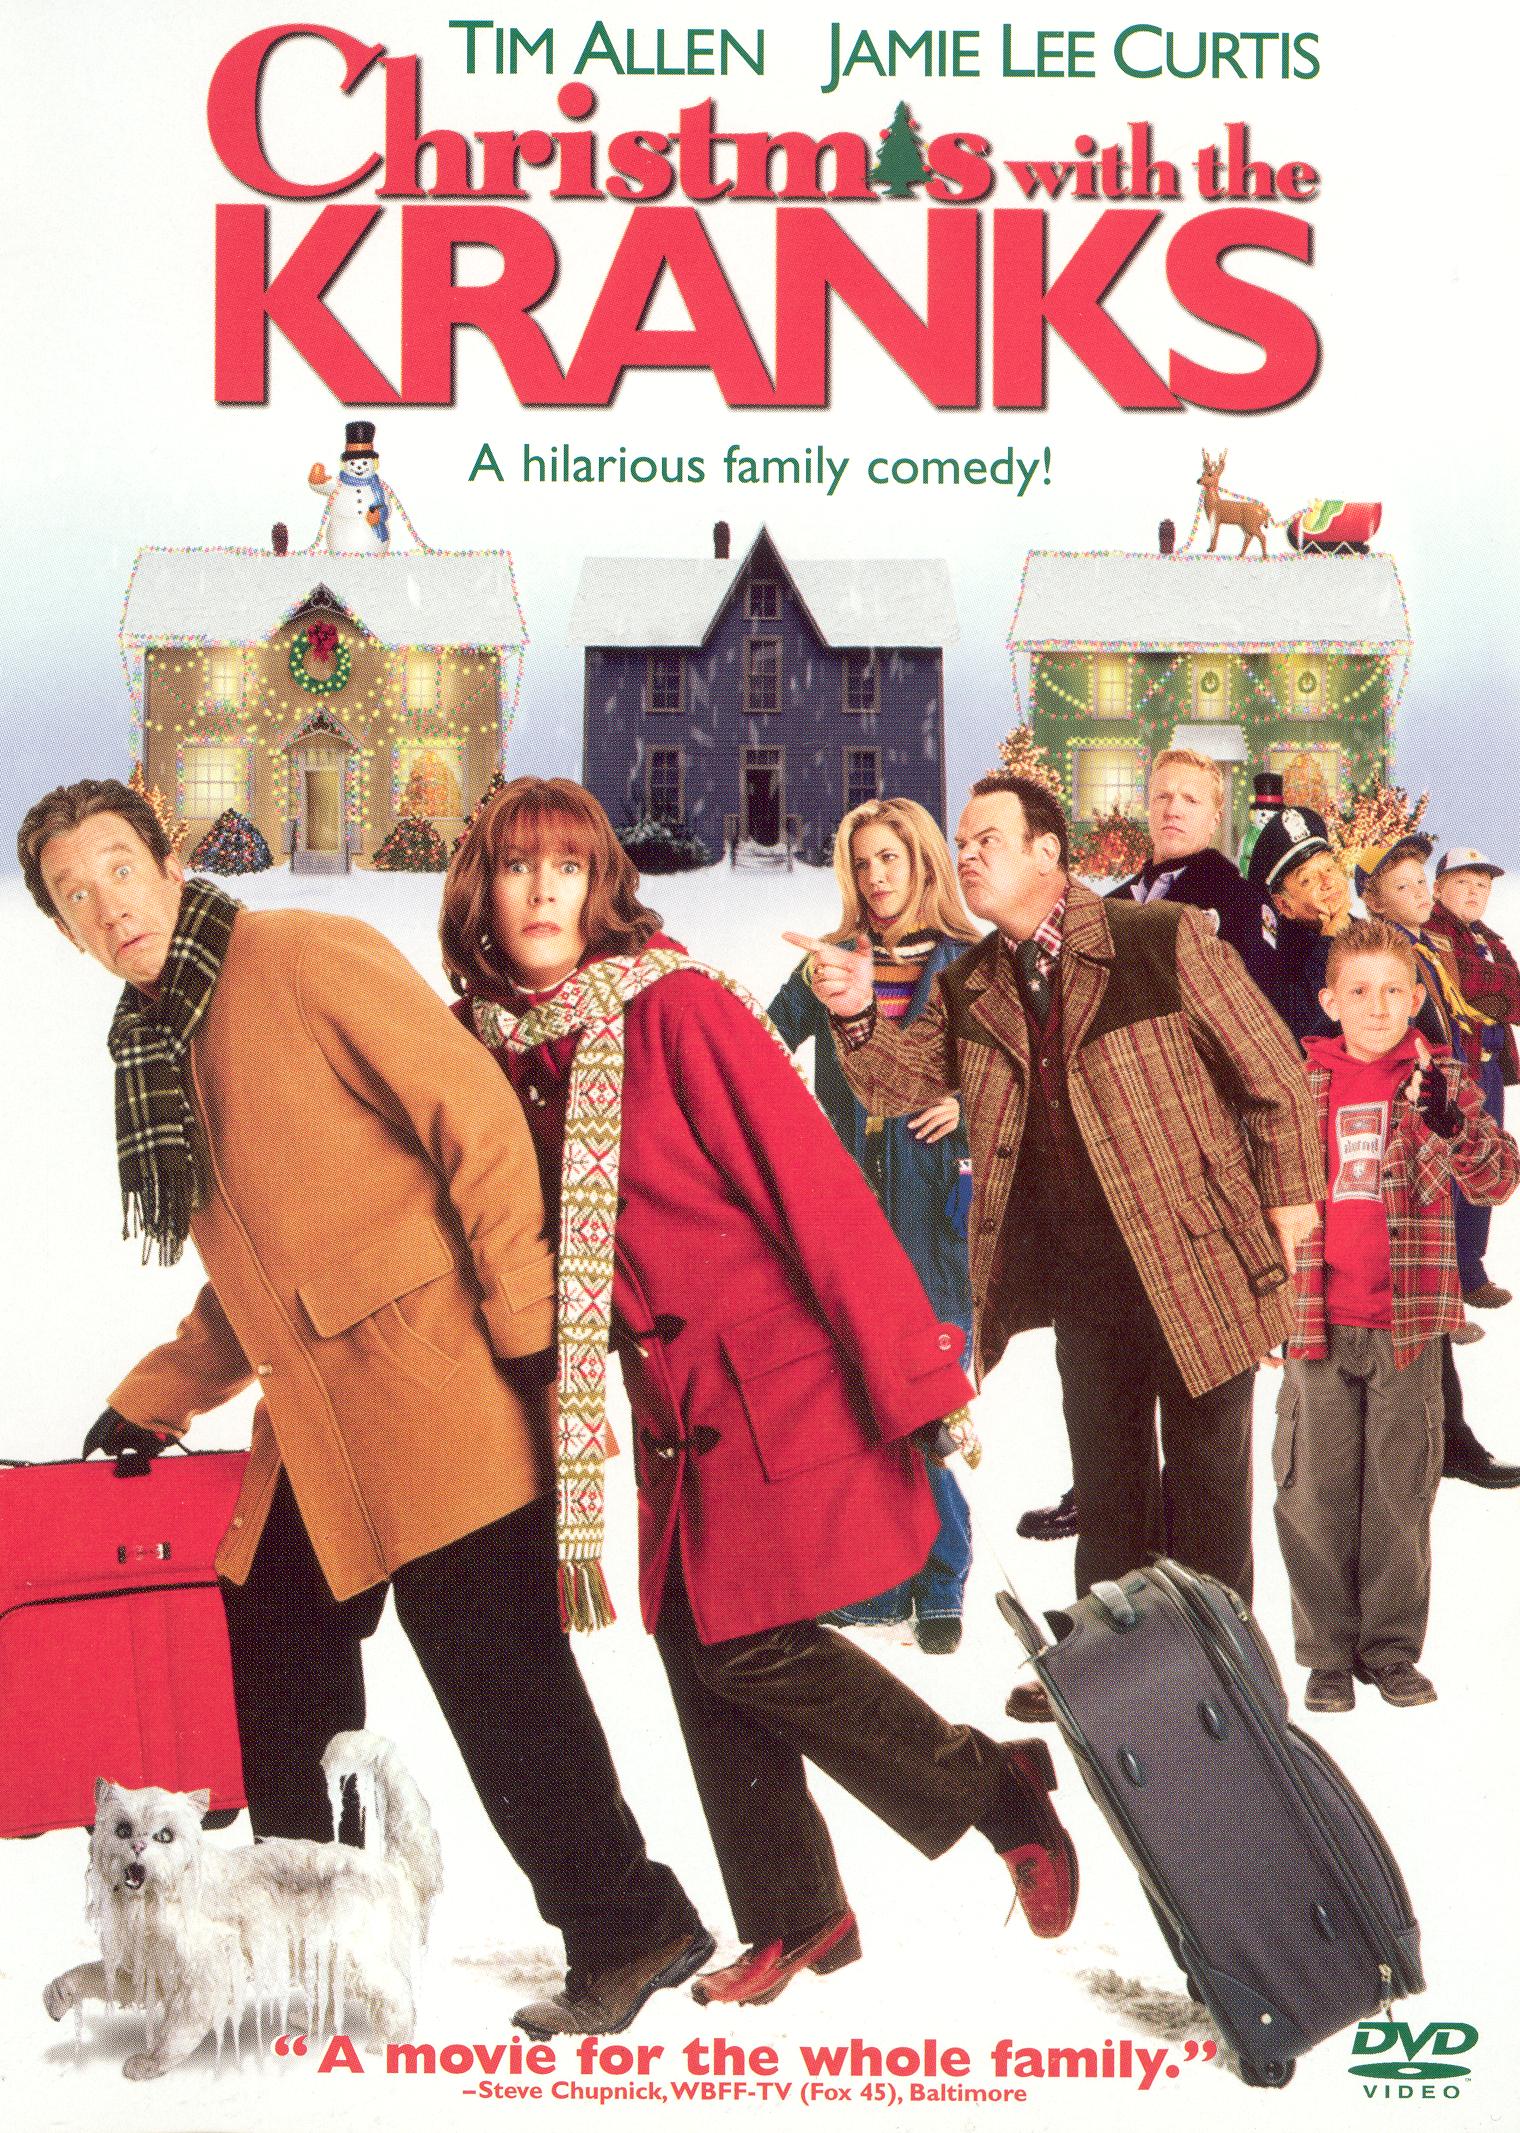 Download Christmas With the Kranks DVD 2004 - Best Buy